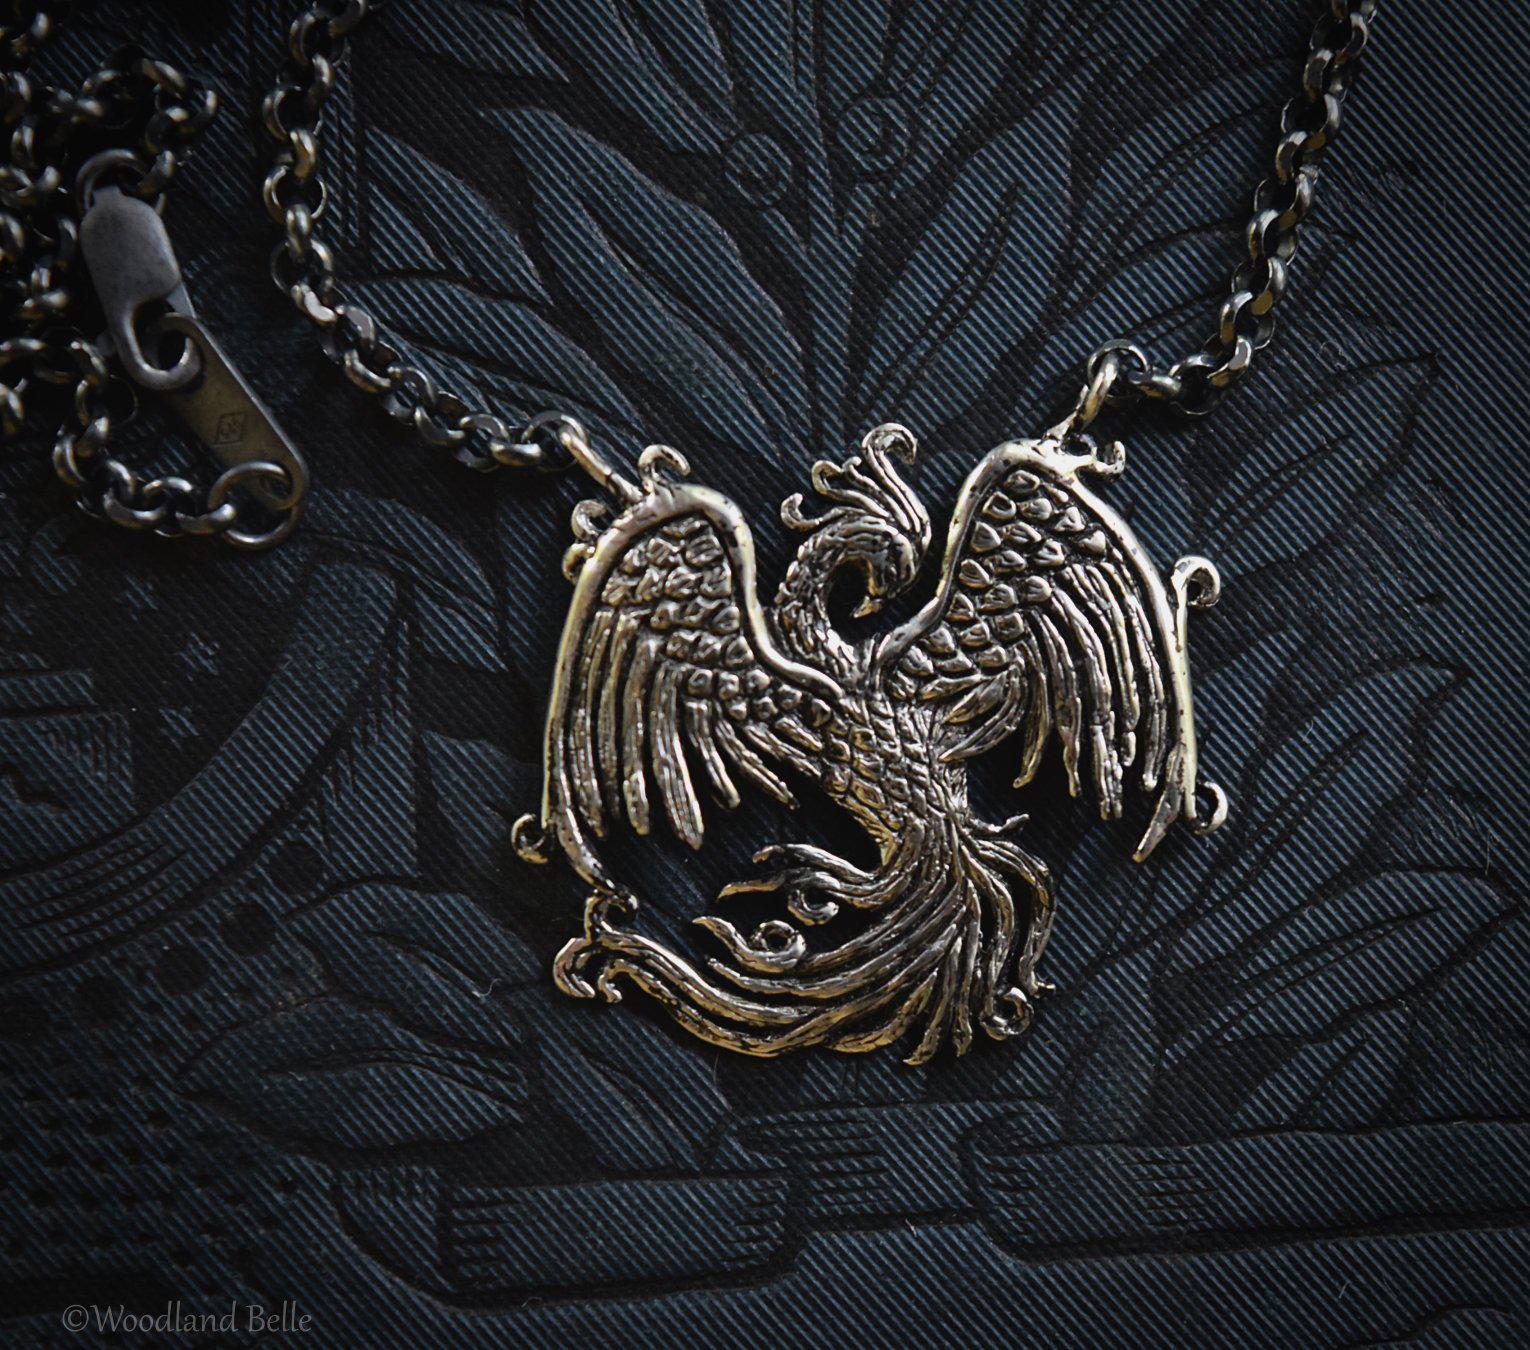 Phoenix Necklace for Men - Oxidized Sterling Silver Phoenix Pendant - Firebird Phoenix Rising Jewelry - Recycled Silver - Gift for Him